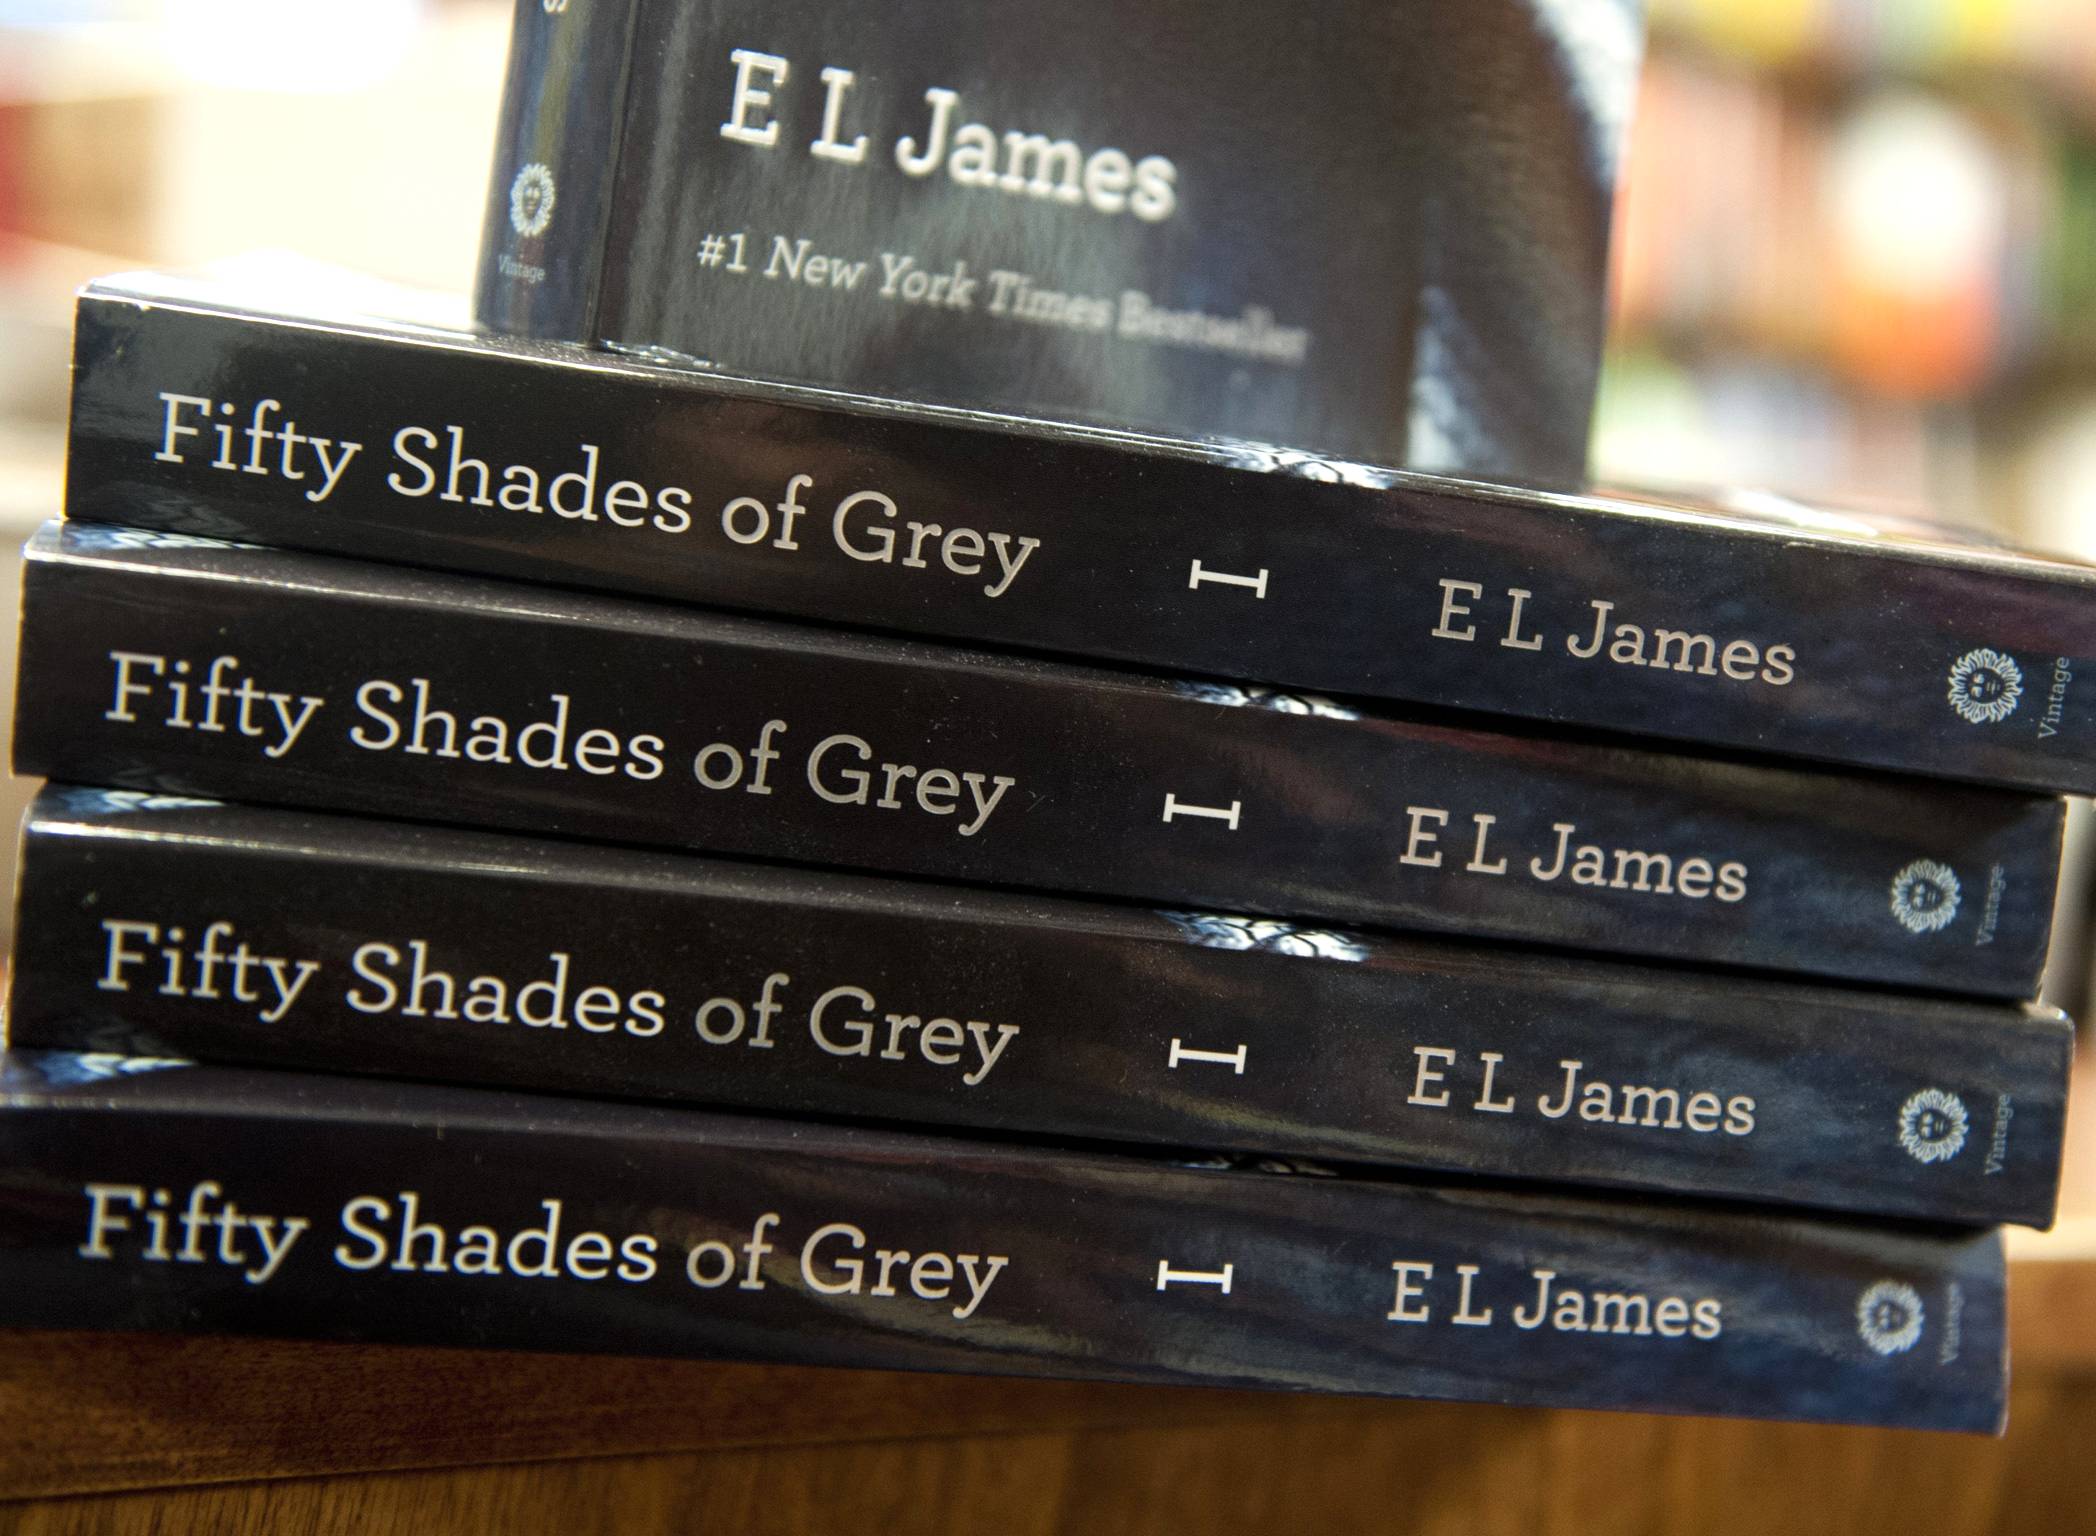 The Fifty Shades of Grey books were the UK’s three best-selling titles of 2012, having collectively sold 10.5 million copies.